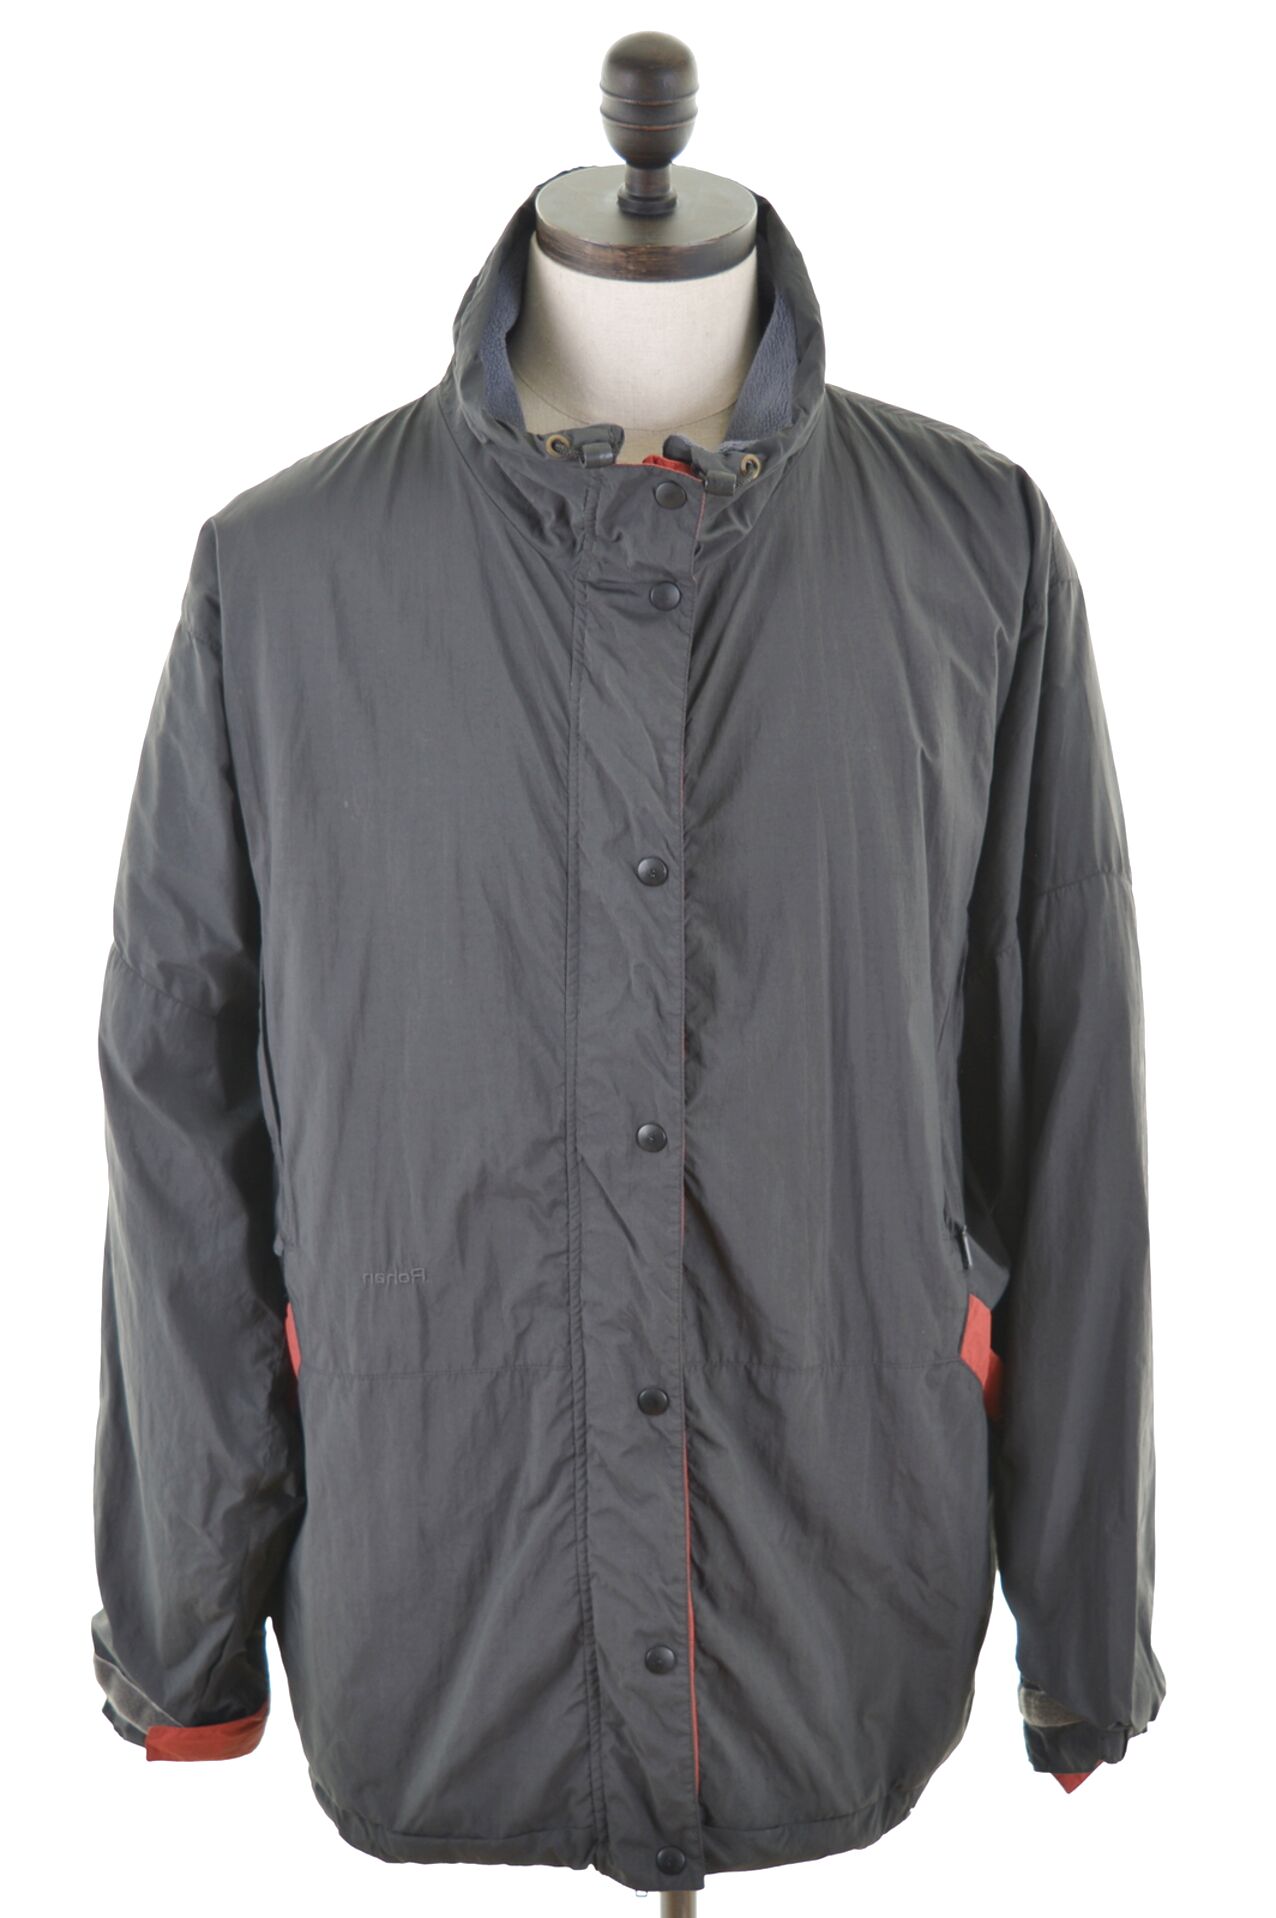 Rohan Mens Jacket for sale in UK | 62 used Rohan Mens Jackets